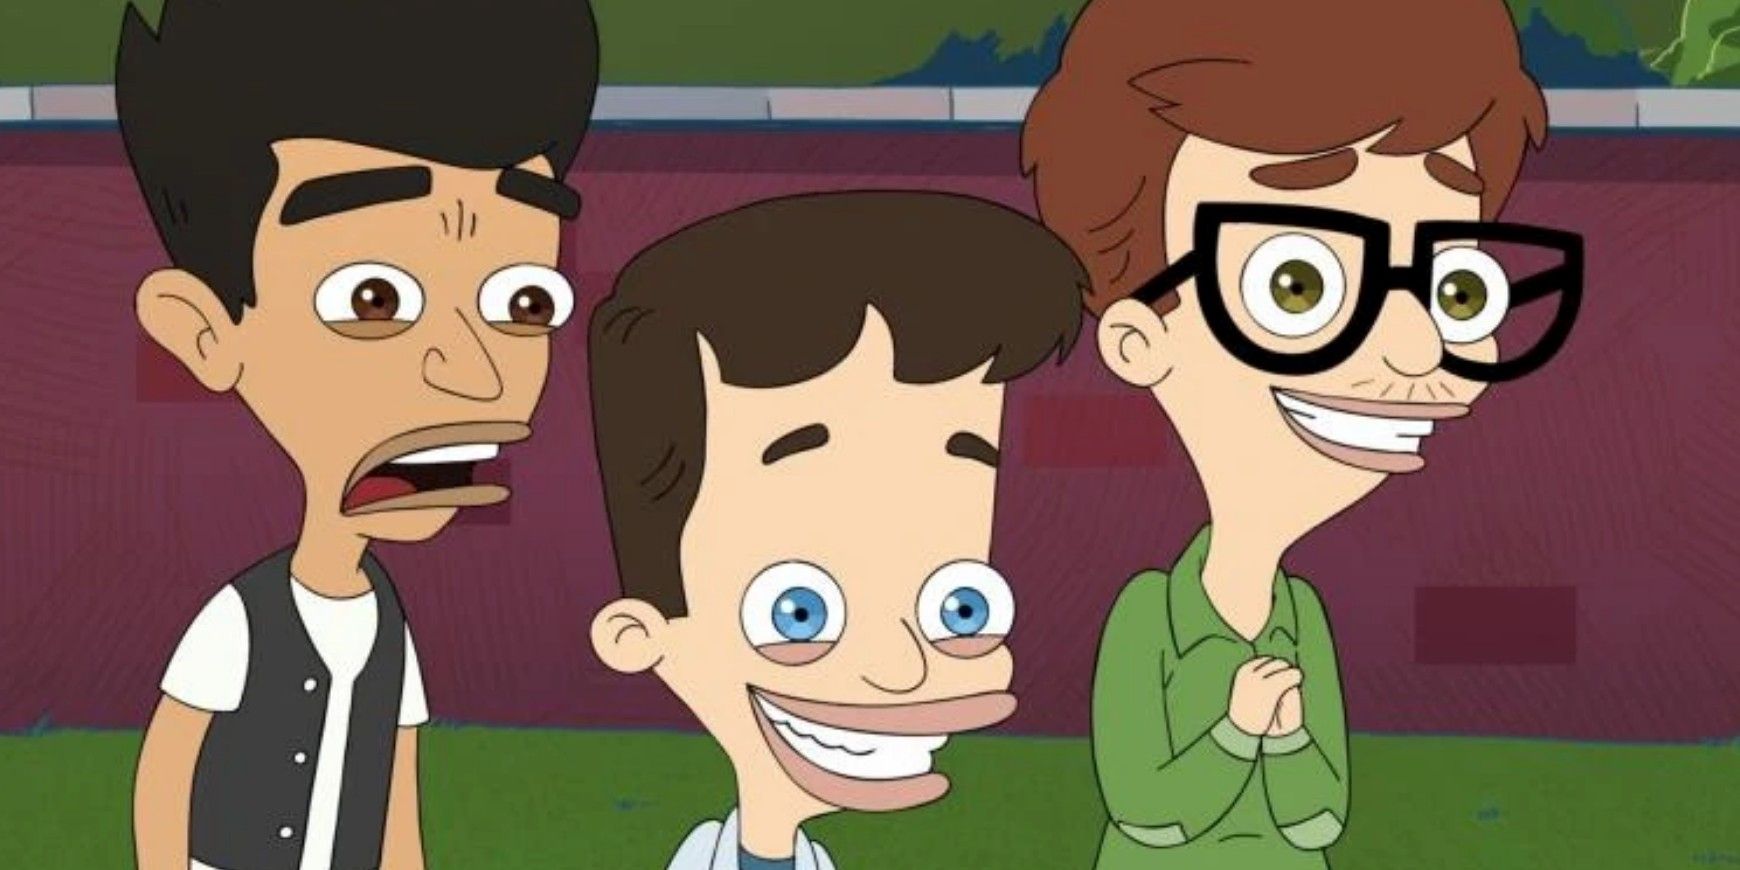 Jay Nick and Andrew in Big Mouth